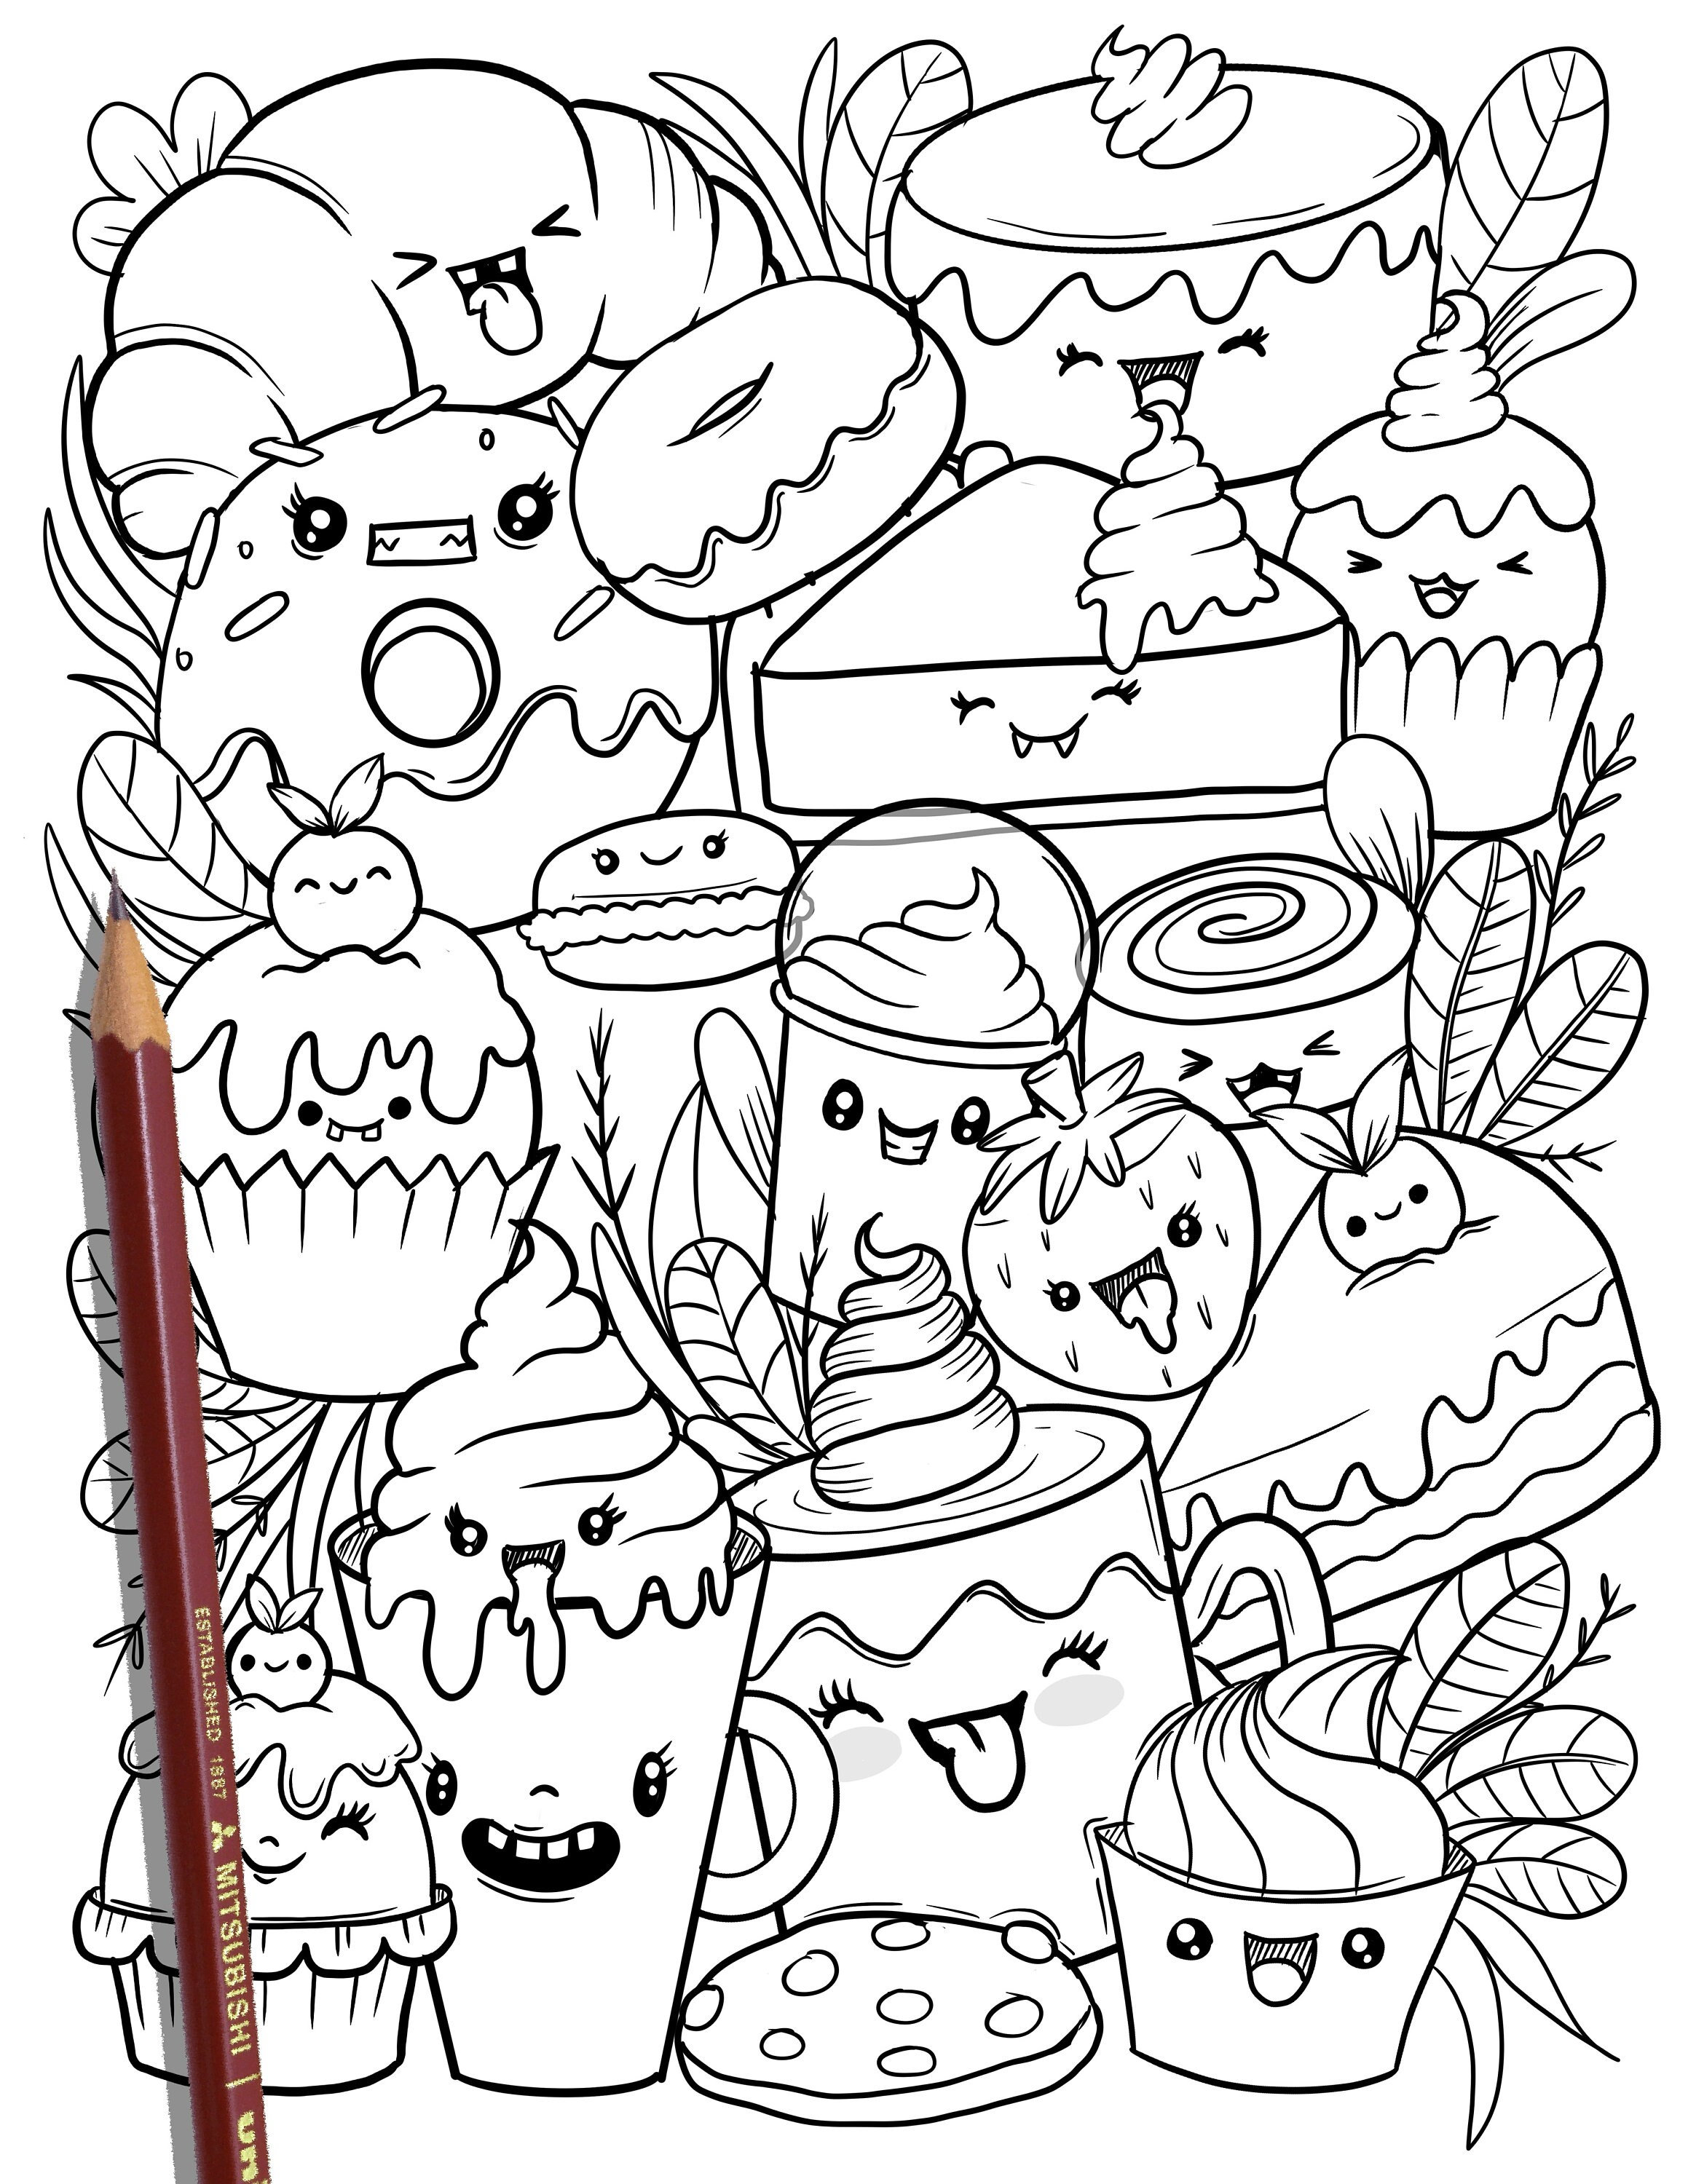 Printable cute dessert coloring page hand